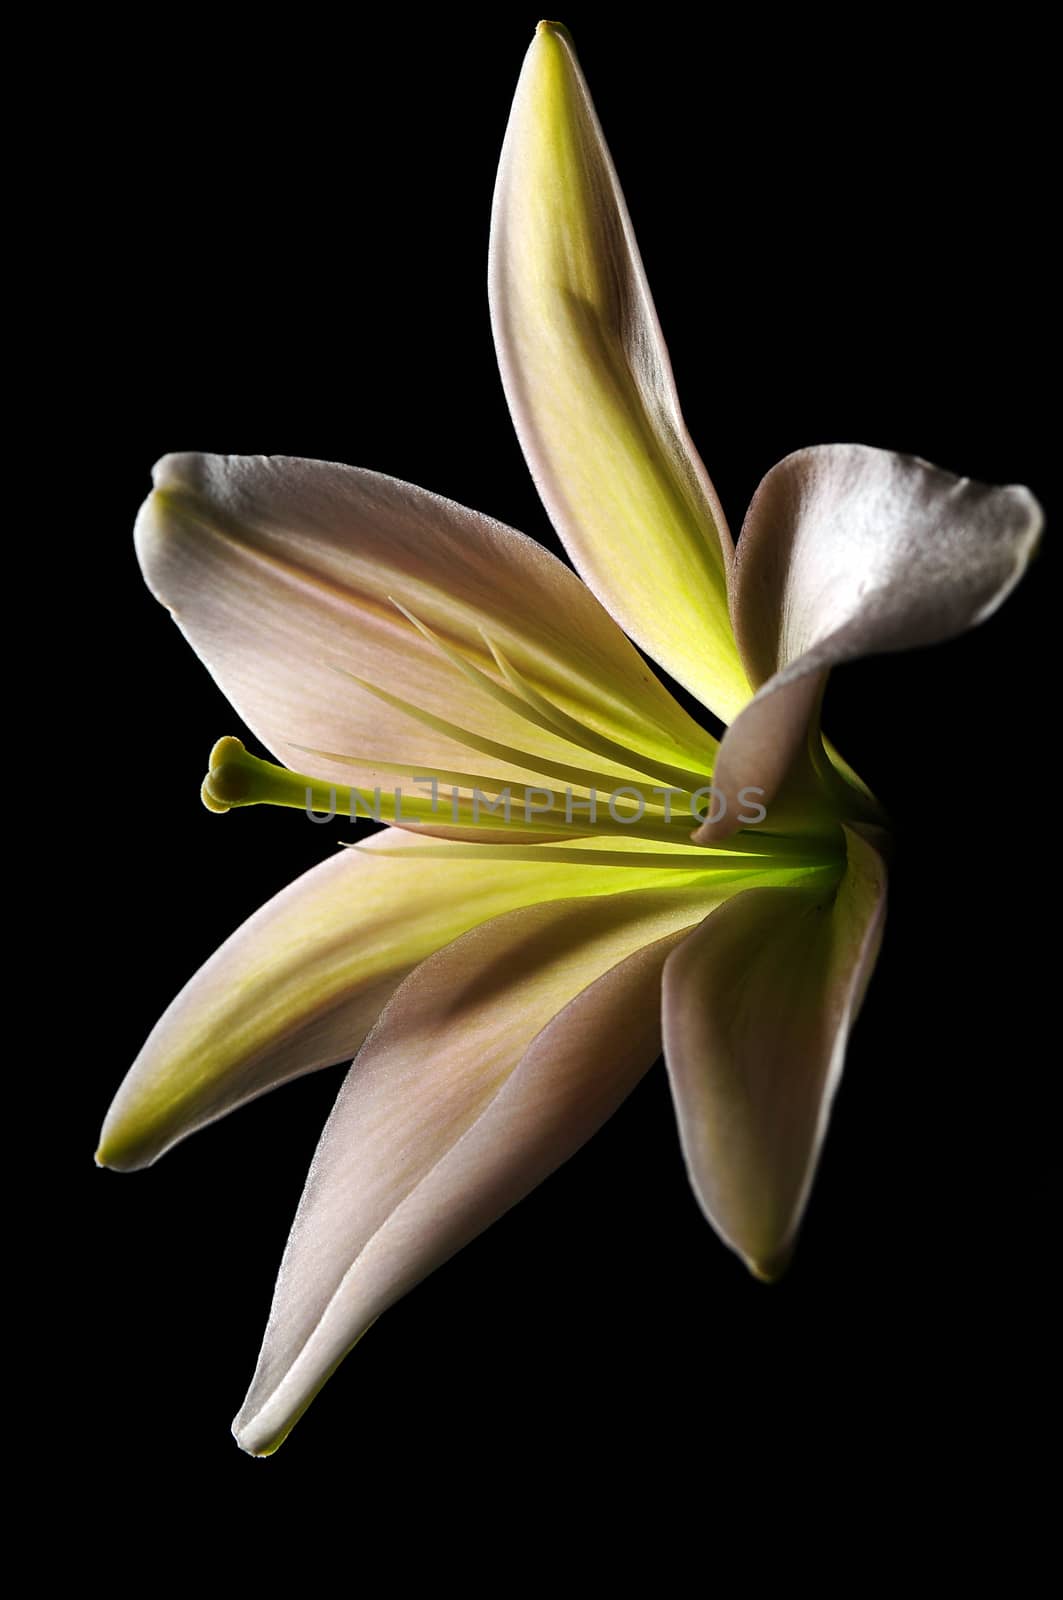 lily on black background by ftlaudgirl